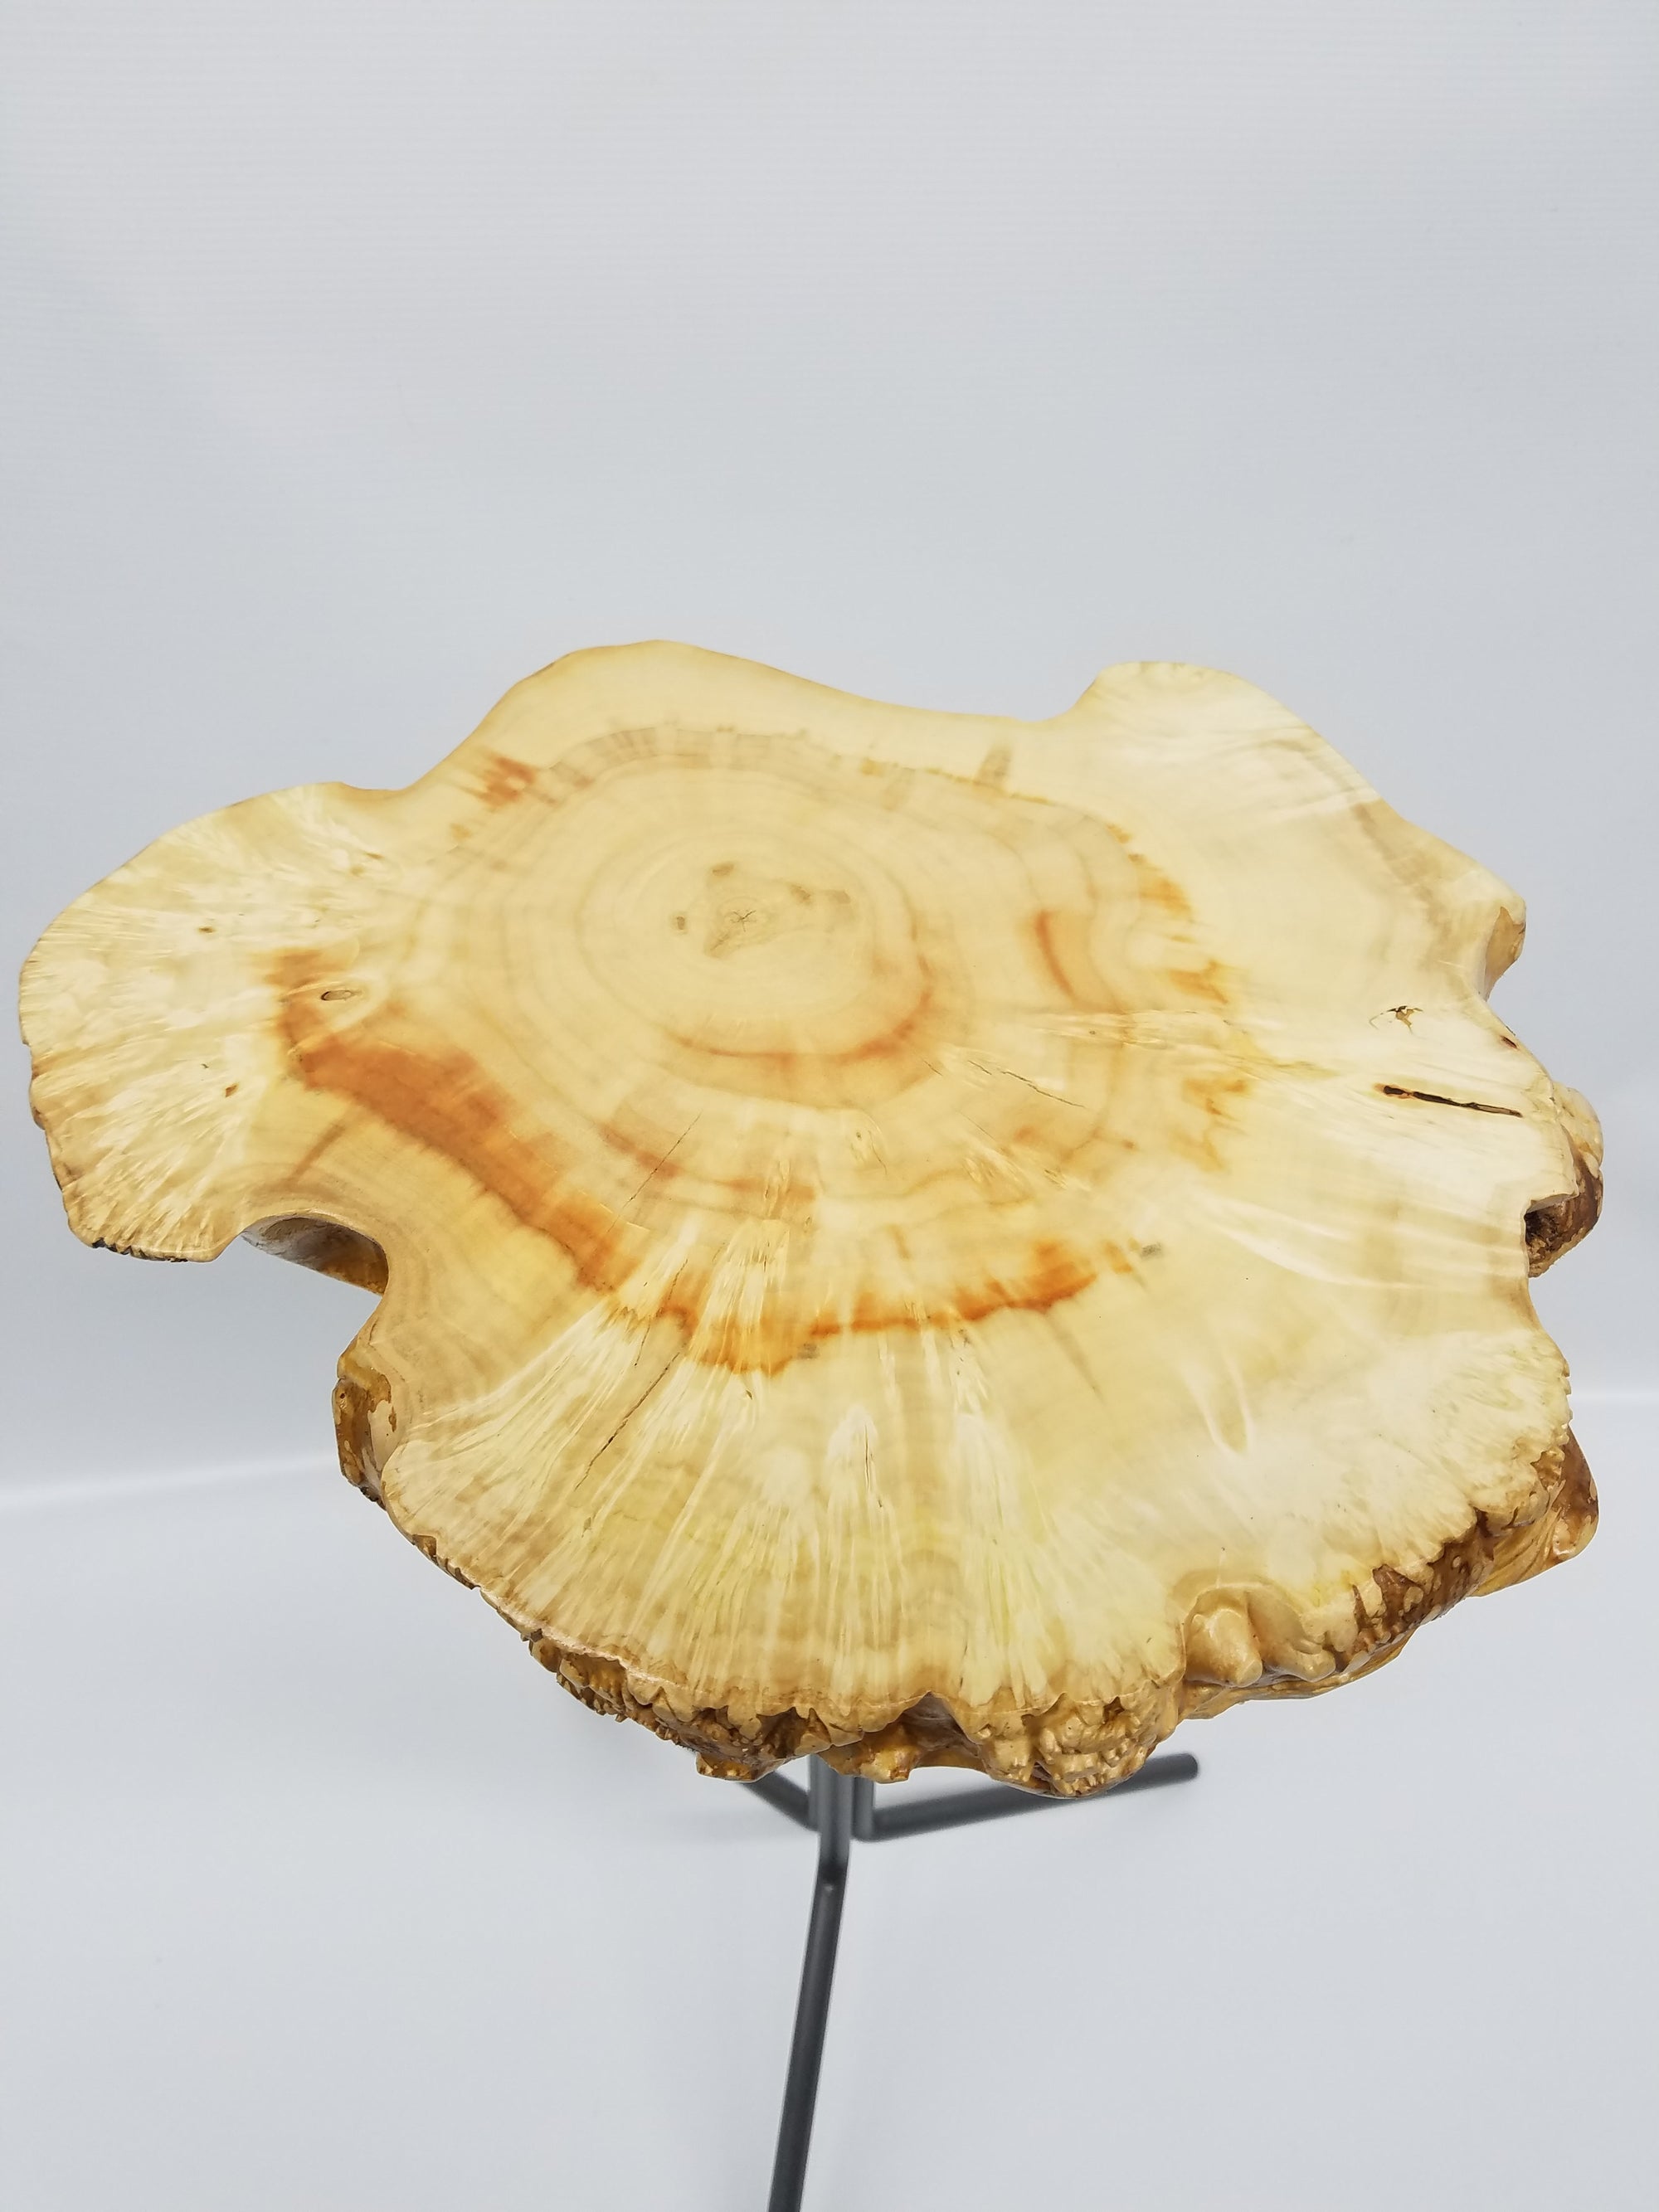 Small End Table- Drink Stand- Side Table- Maple Burl- Plant Stand- Foyer Table- Statuary Stand- Unique Furniture- Handmade Table- Slab Table